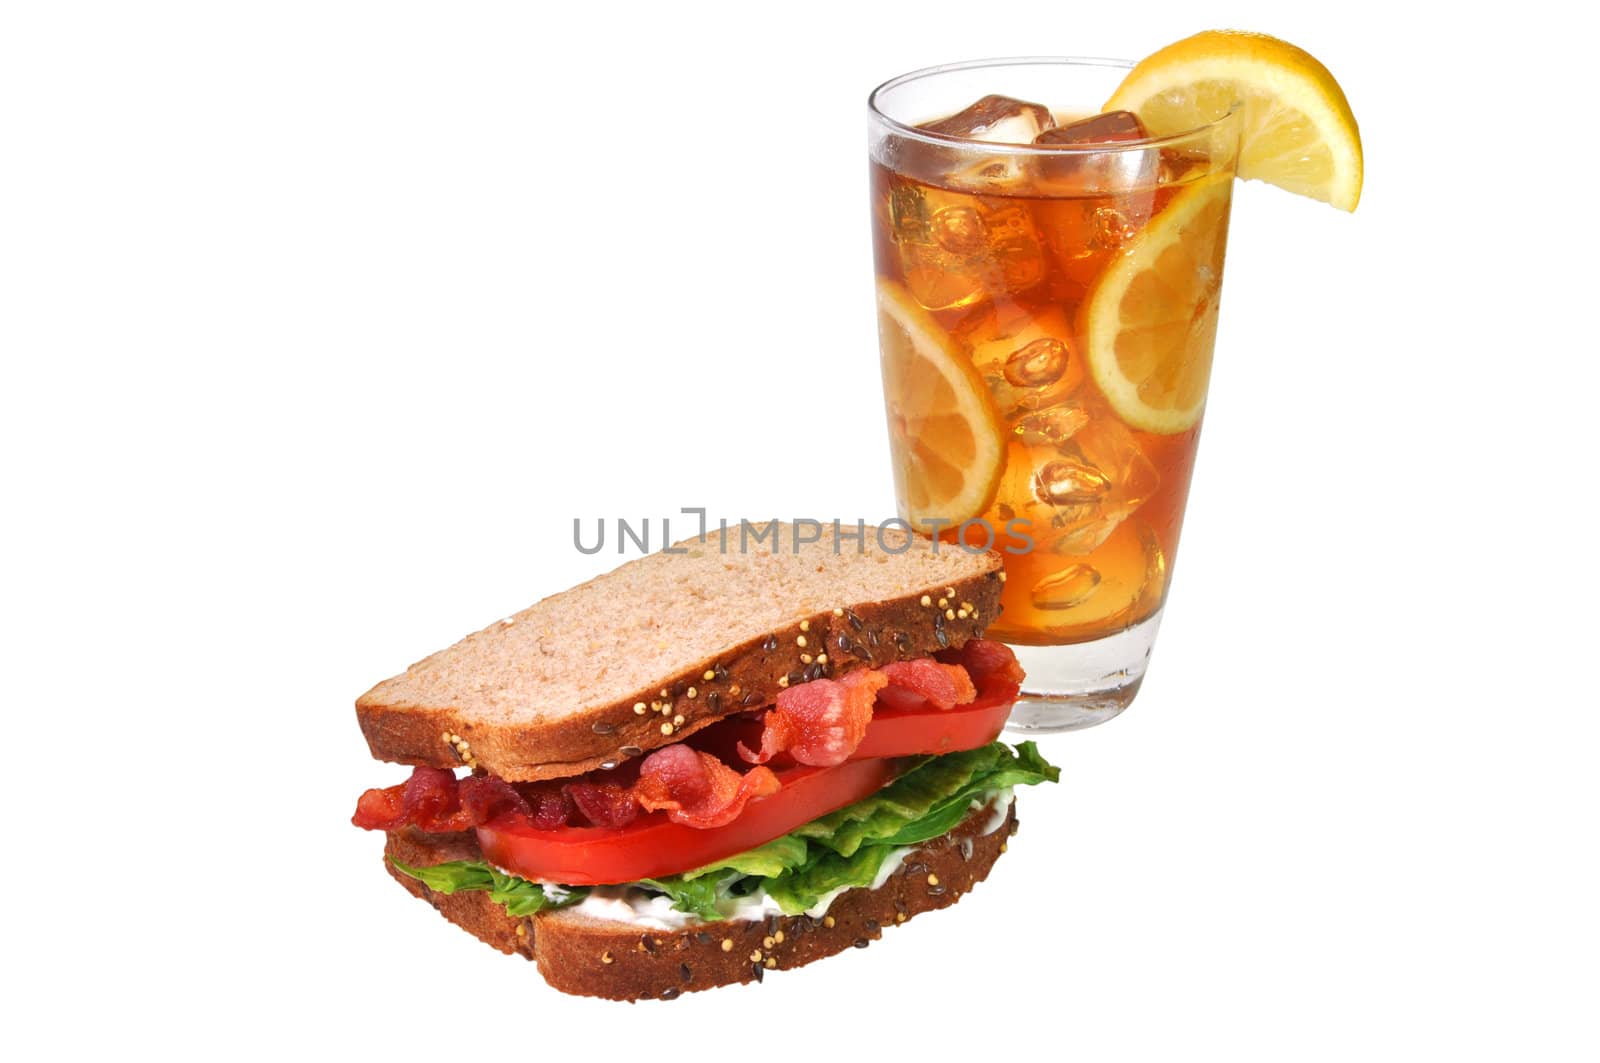 Bacon, lettuce, and tomato sandwich with iced tea with lemons.  Isolated on white background with clipping path.